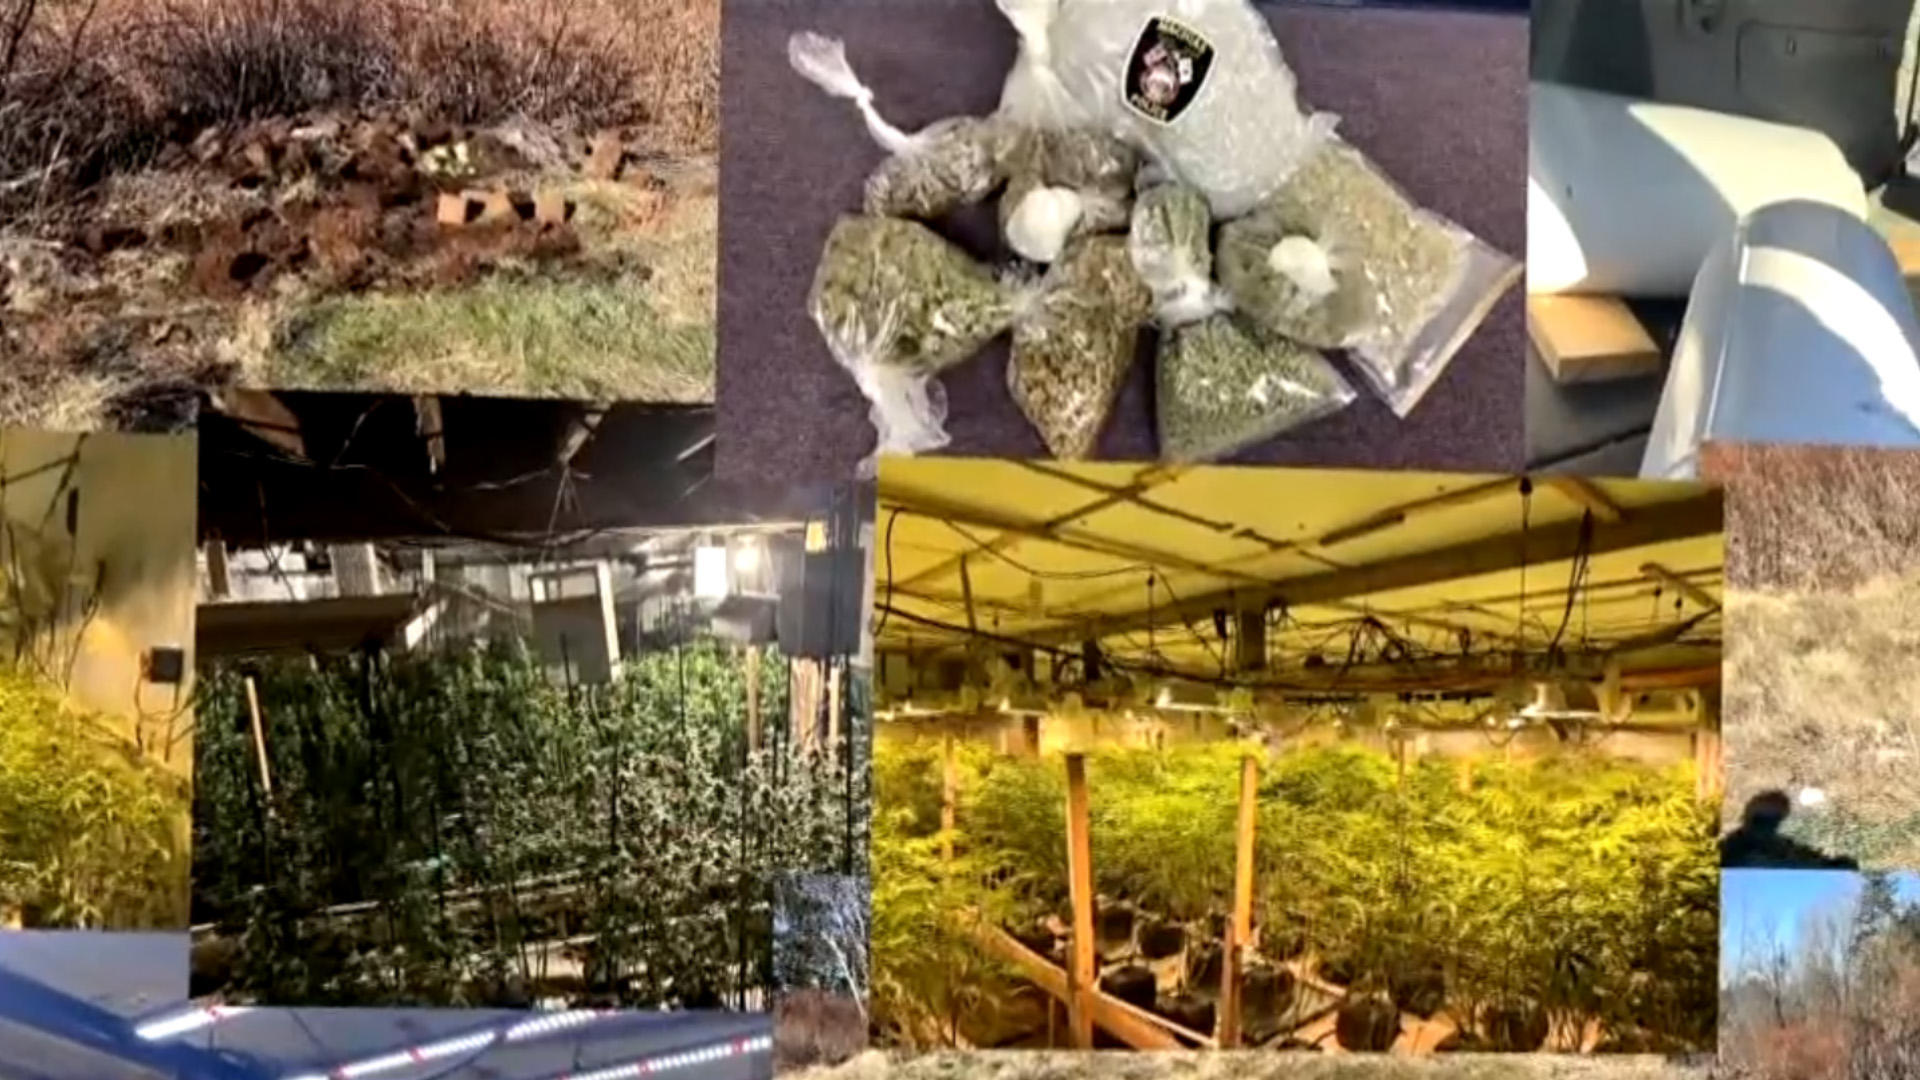 Marijuana tied to Chinese criminal networks infiltrates Maine